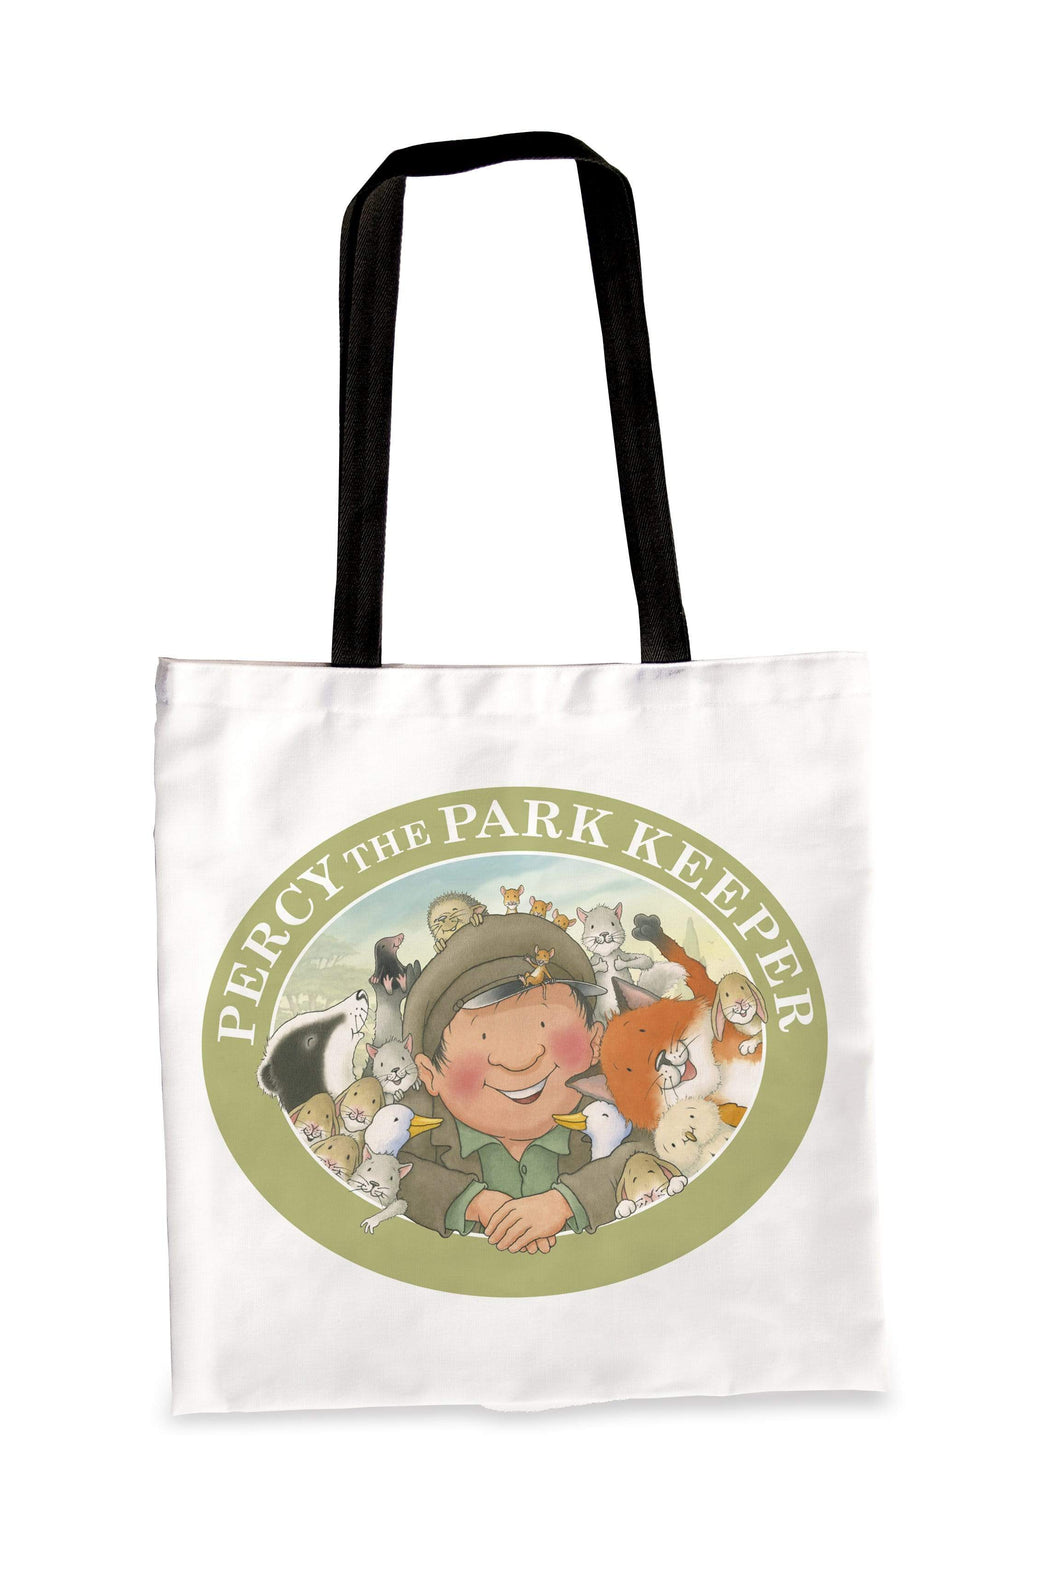 Percy The Park Keeper Tote bag Percy and friends premium Tote Bag - Large